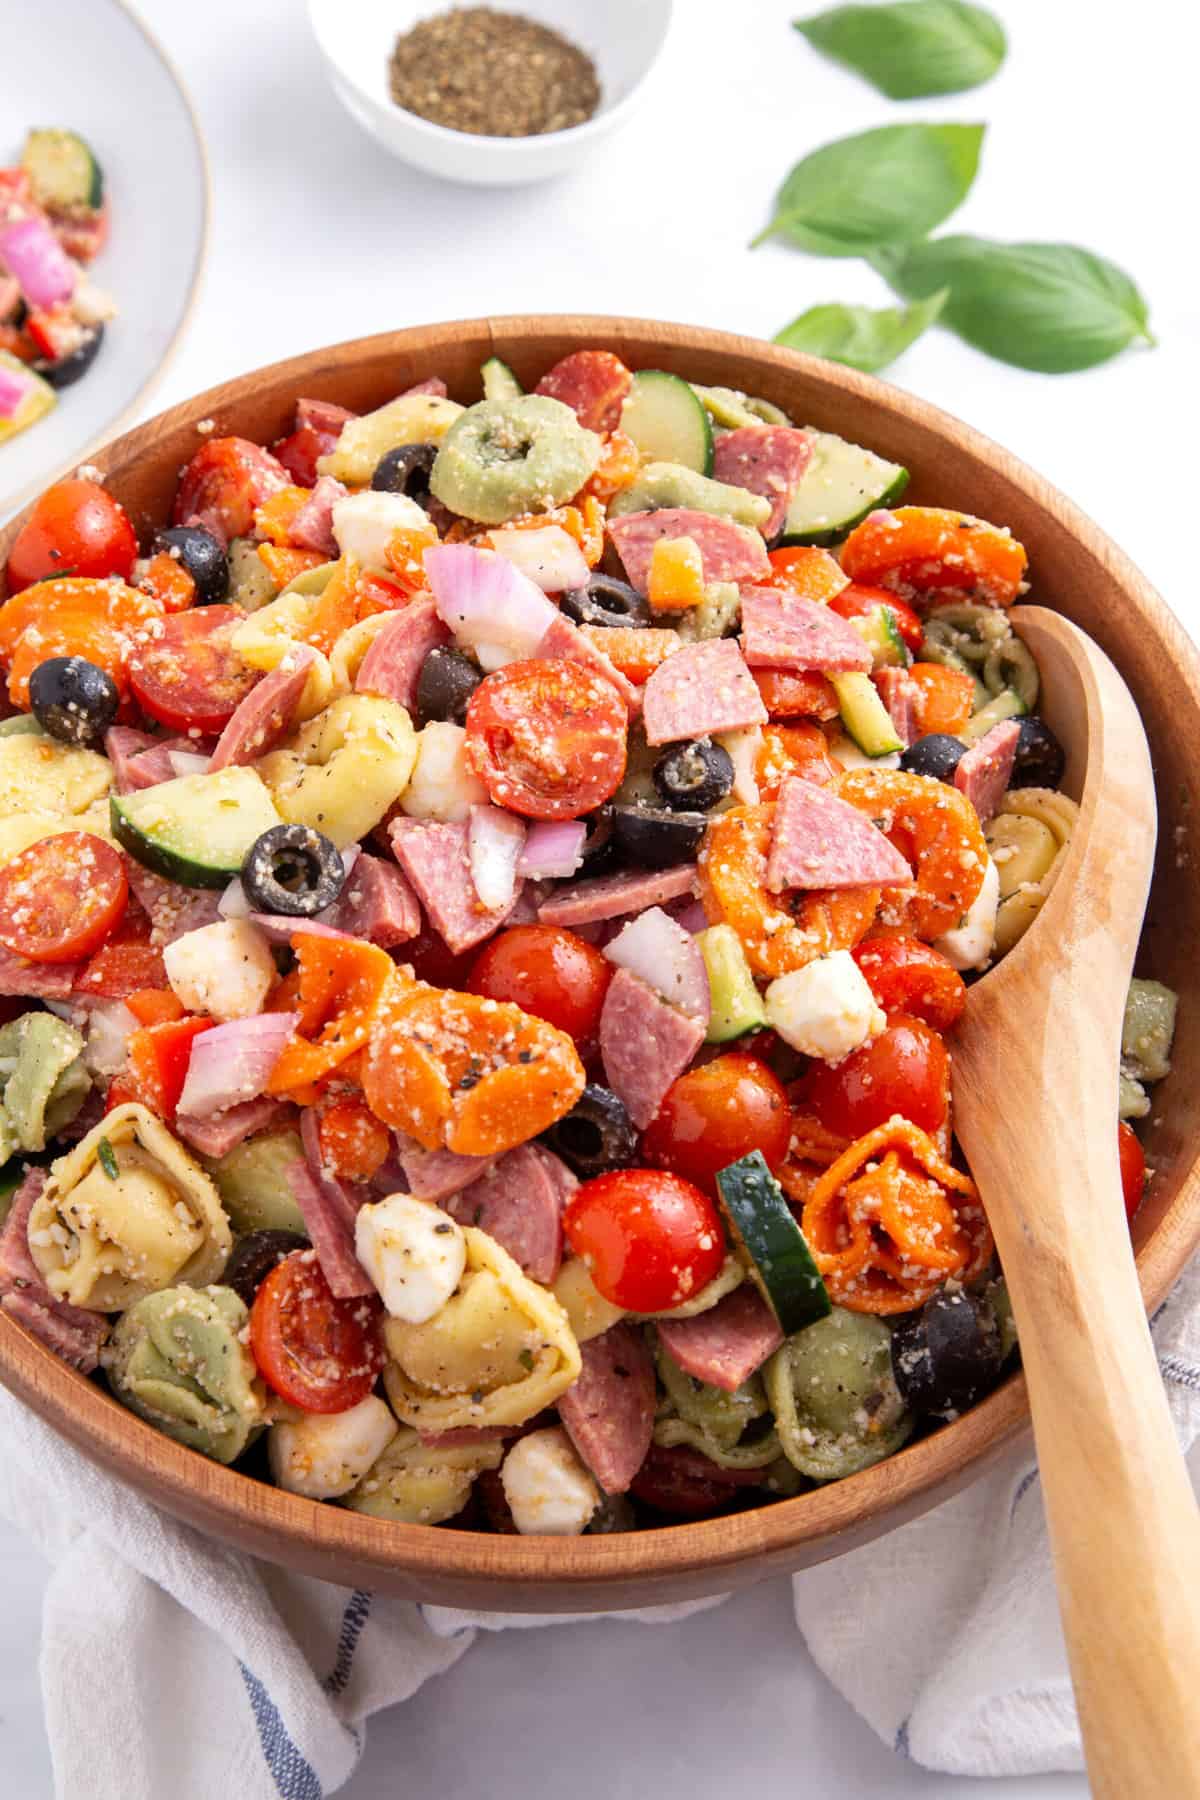 top down image of a wooden bowl of tortellini pasta salad with a large wooden spoon sitting in the bowl